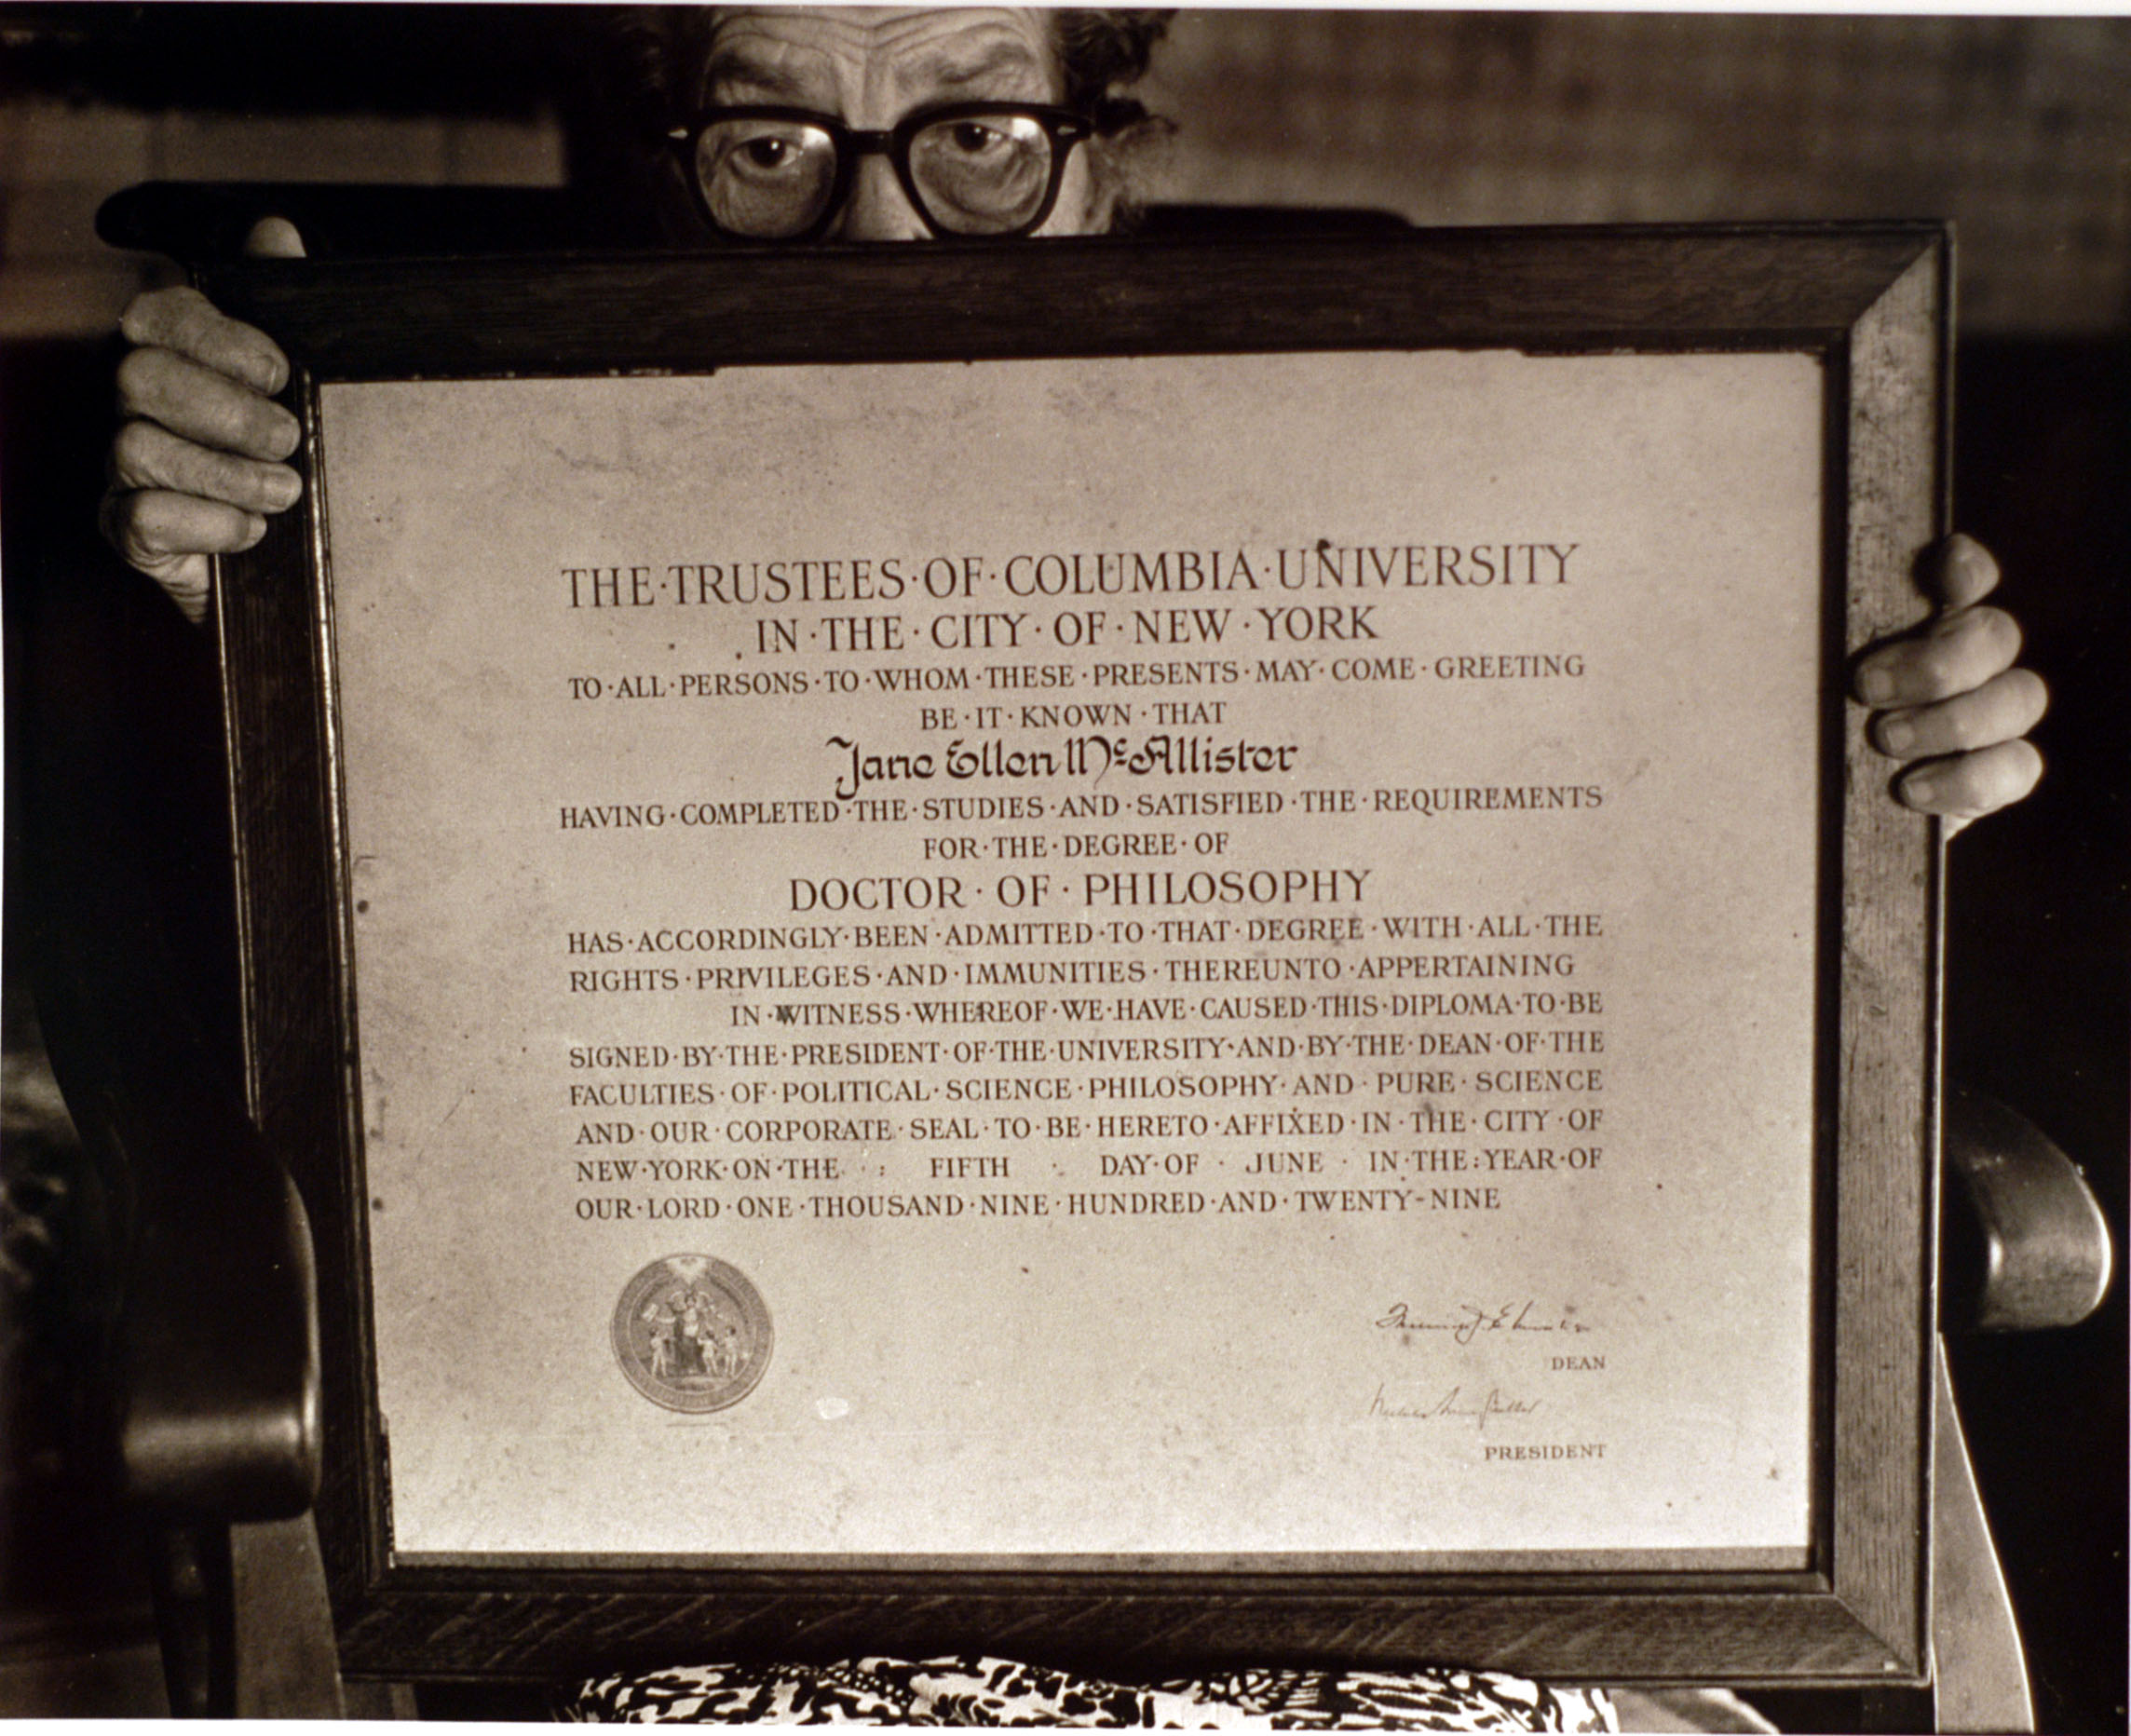 Holding her diploma from Columbia University